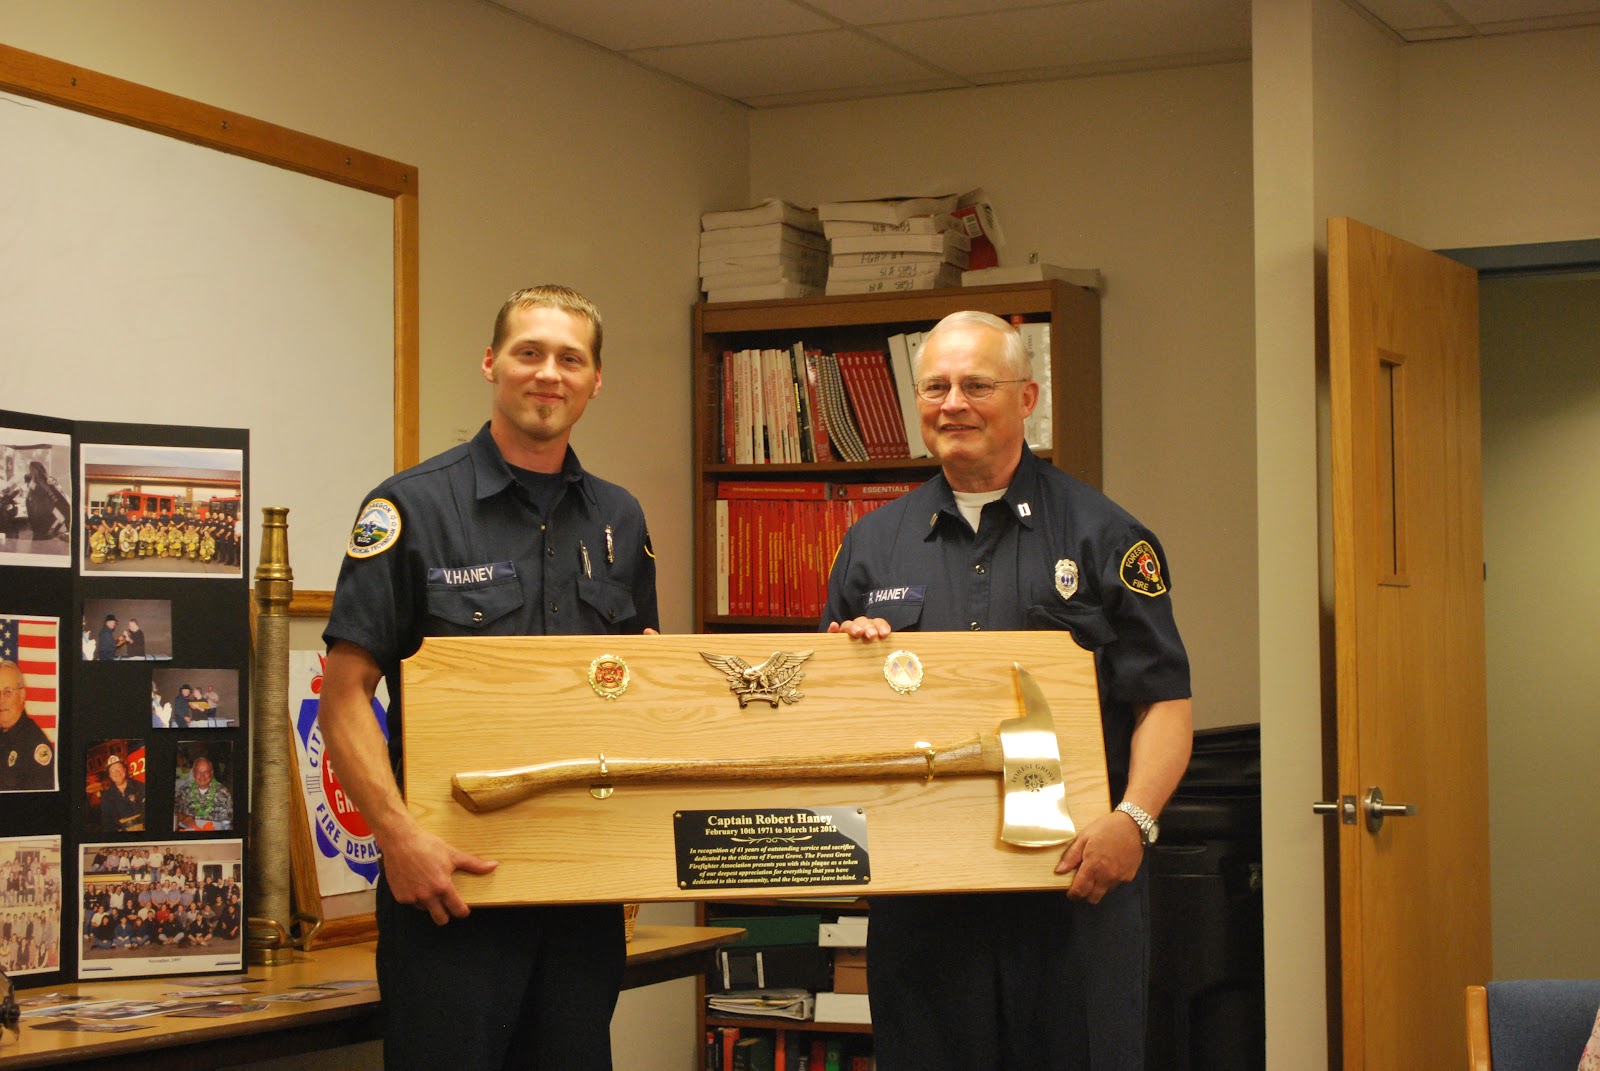 Forest Grove And Cornelius Fire Departments Volunteer Captain Bob Haney Retires After 41 Years Of Service